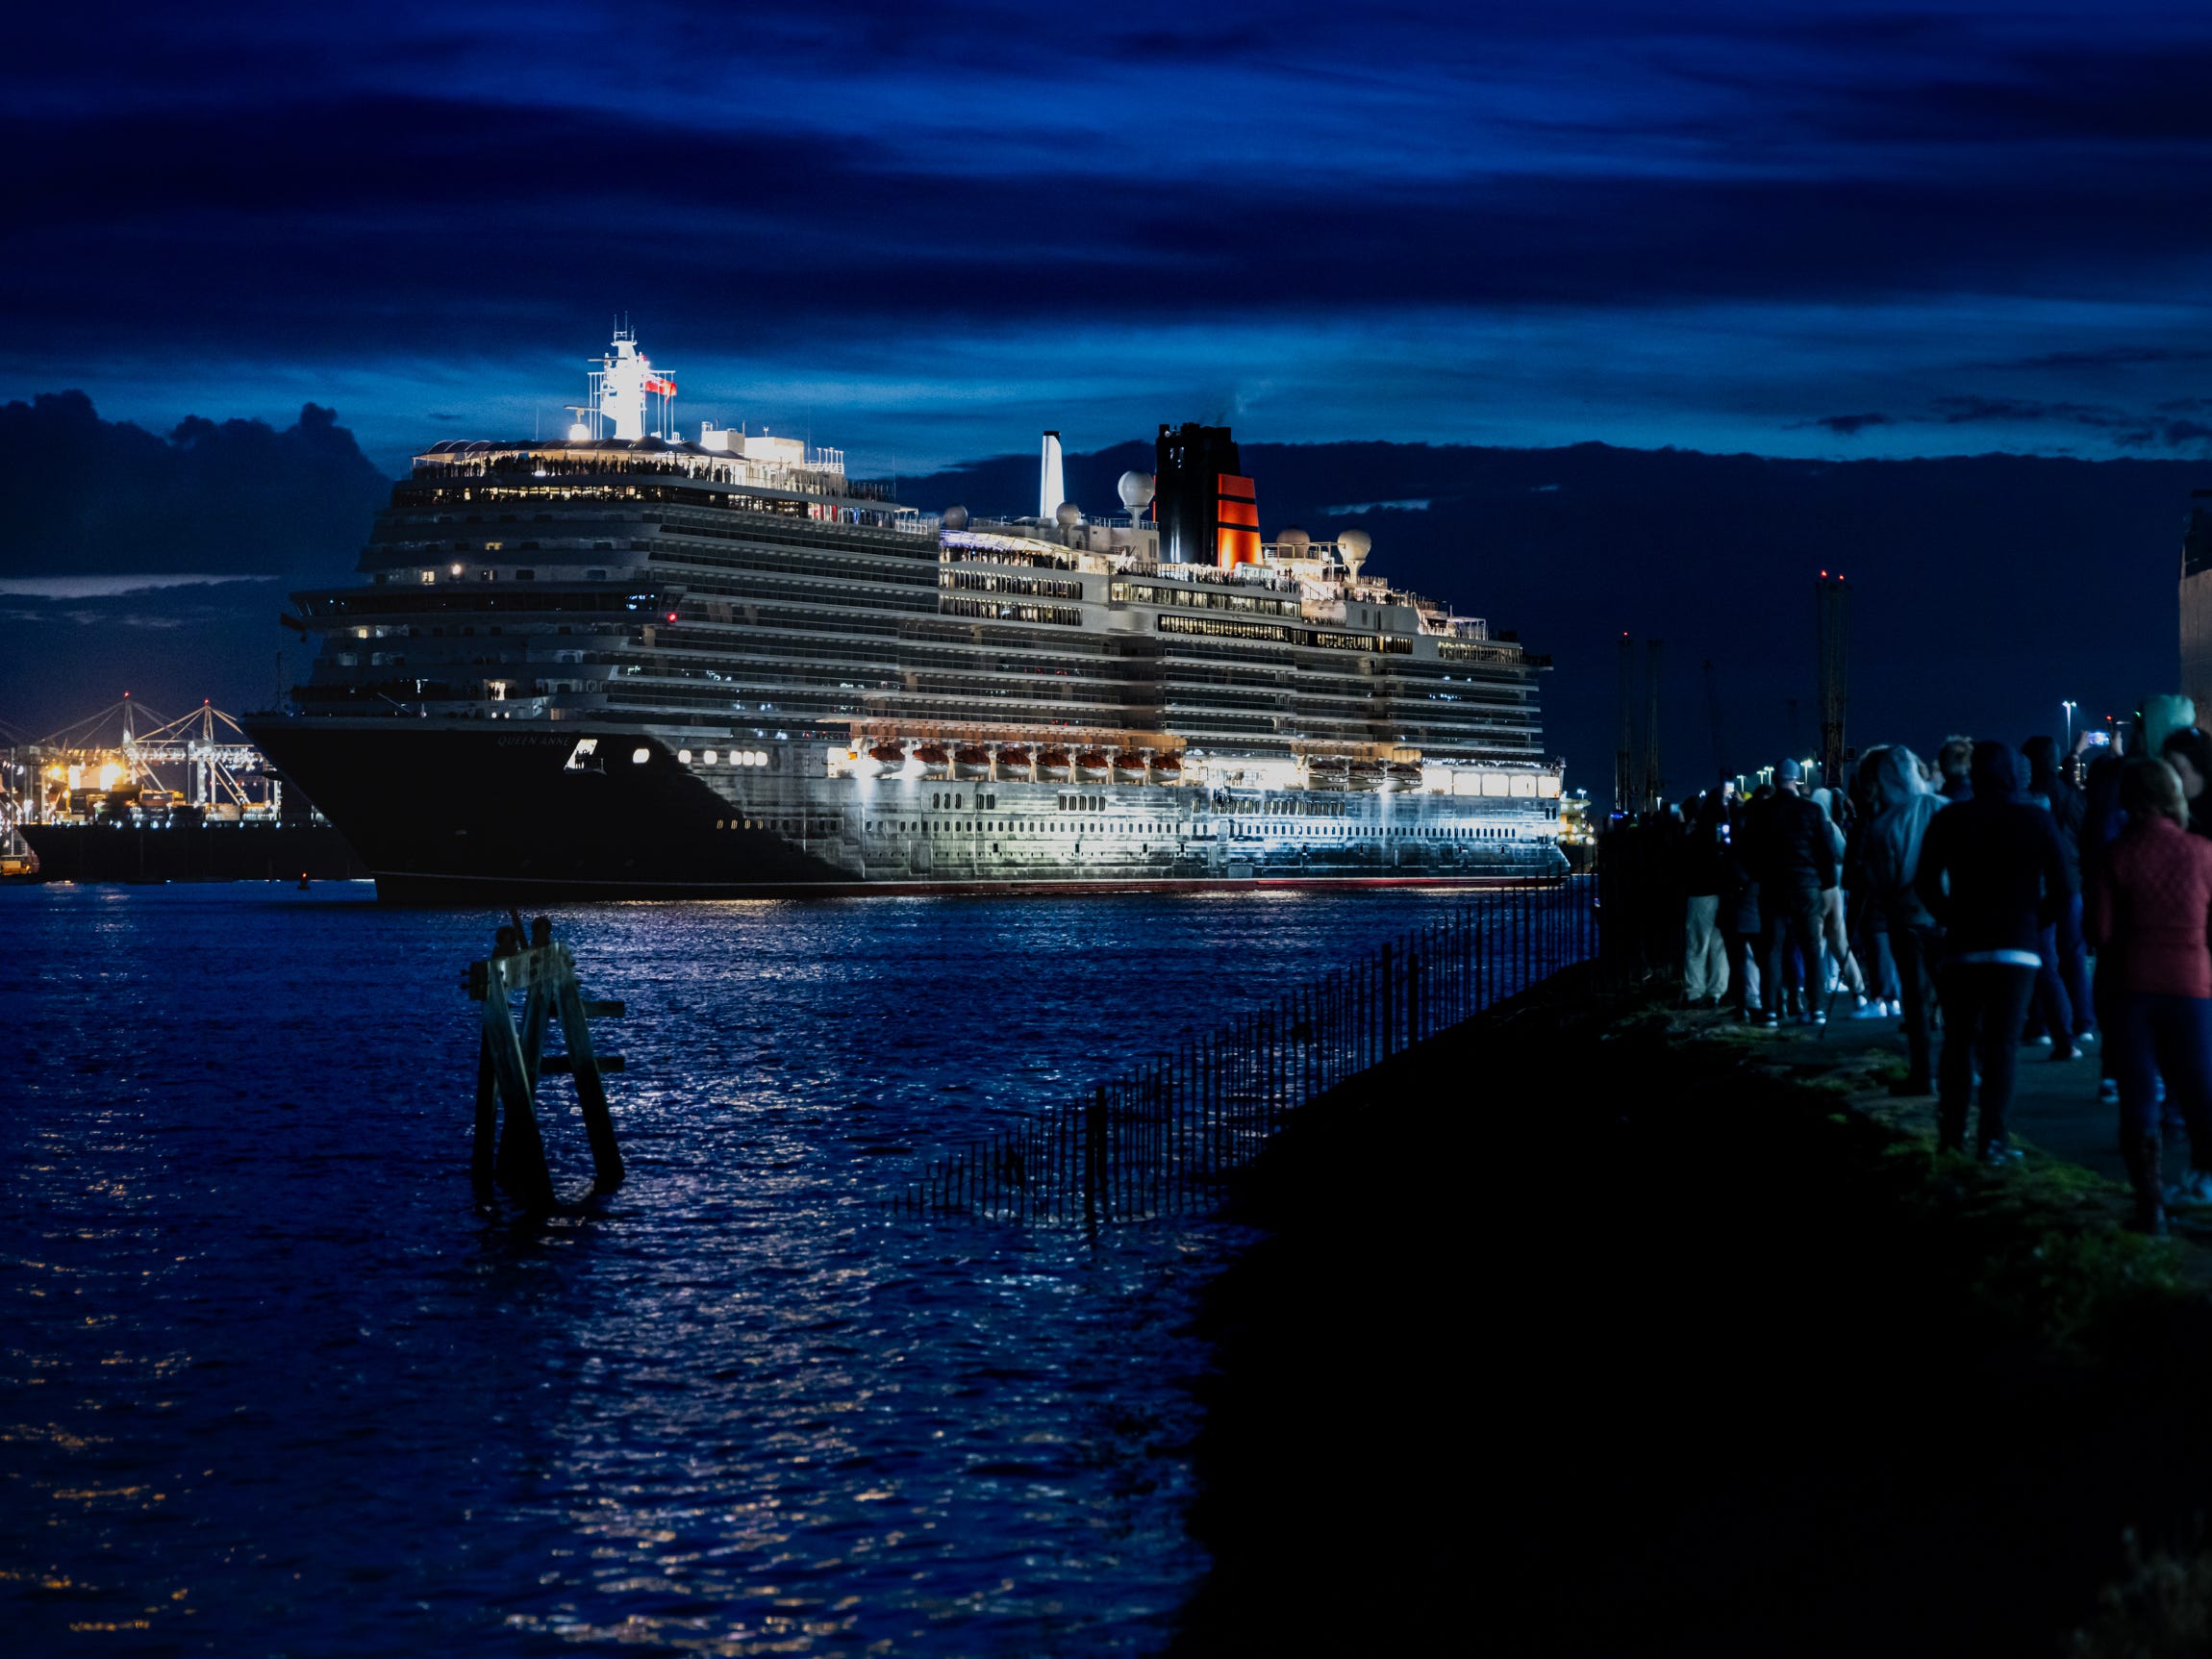 <p>In 2025, Queen Anne will embark on its first three-month around-the-world cruise. However, for the most part, it's not scheduled for repeat <a href="https://www.businessinsider.com/oceania-six-month-around-the-world-cruise-new-luxury-ship-2024-3"><span>long-haul journeys</span></a><span>.</span></p><p><span>Instead, in 2024, the ship will be homeported in Southampton, UK and travel on two- to 19-night itineraries across Europe.</span></p>